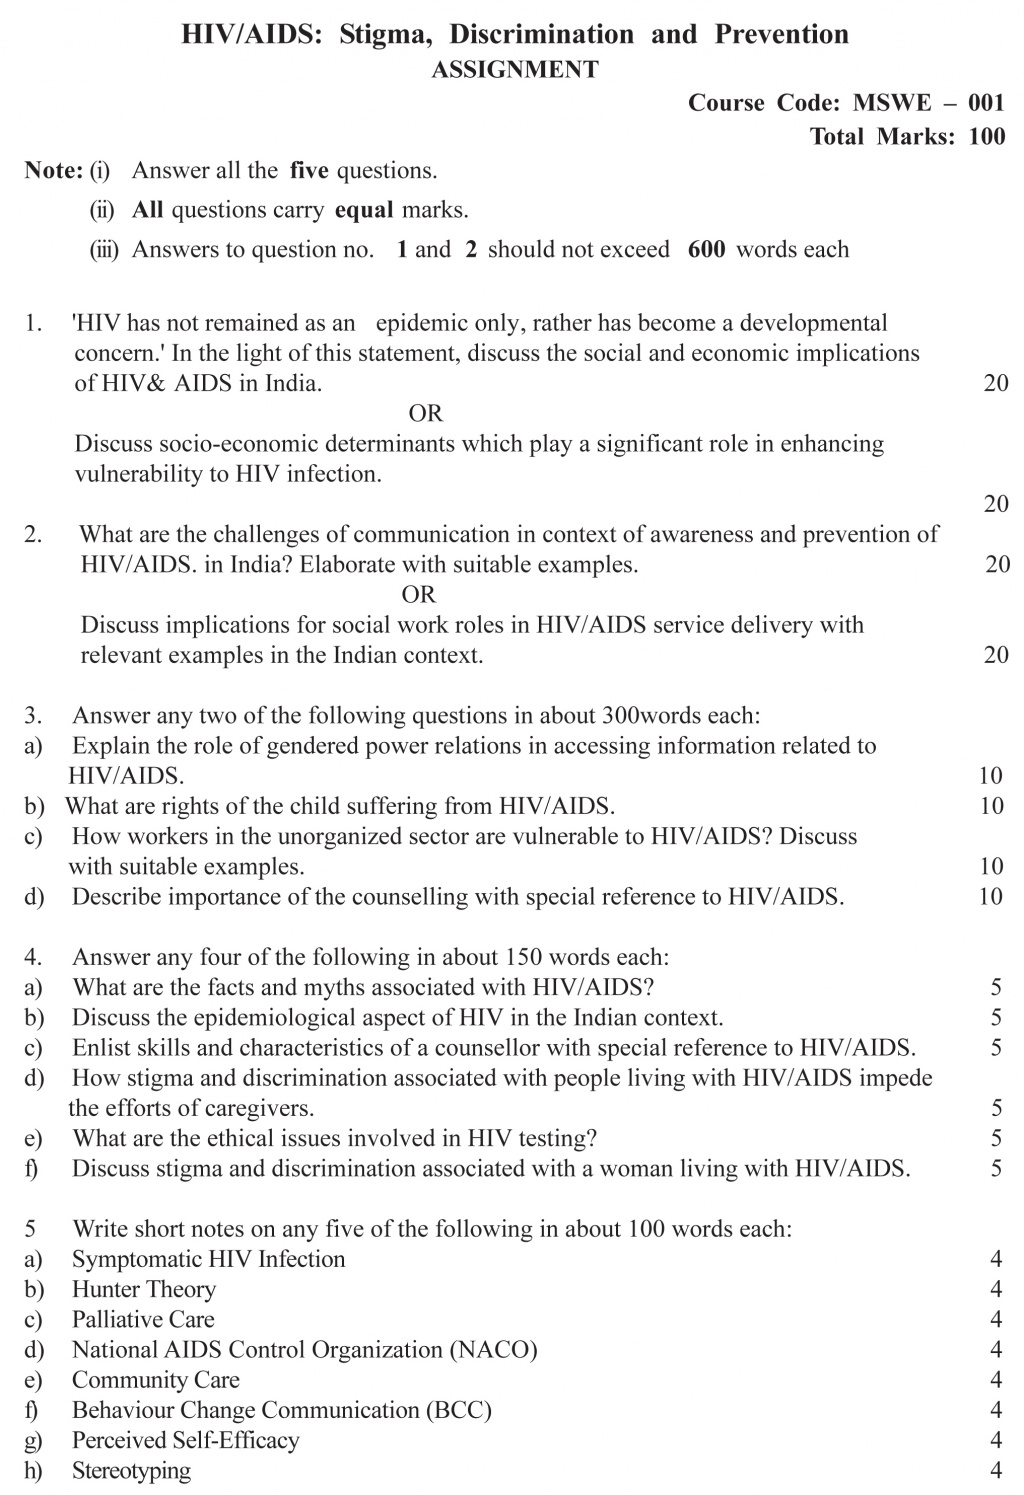 IGNOU MSWE-01 - HIV/AIDS: Stigma, Discrimination and Prevention, Latest Solved Assignment-July 2022 – January 2023